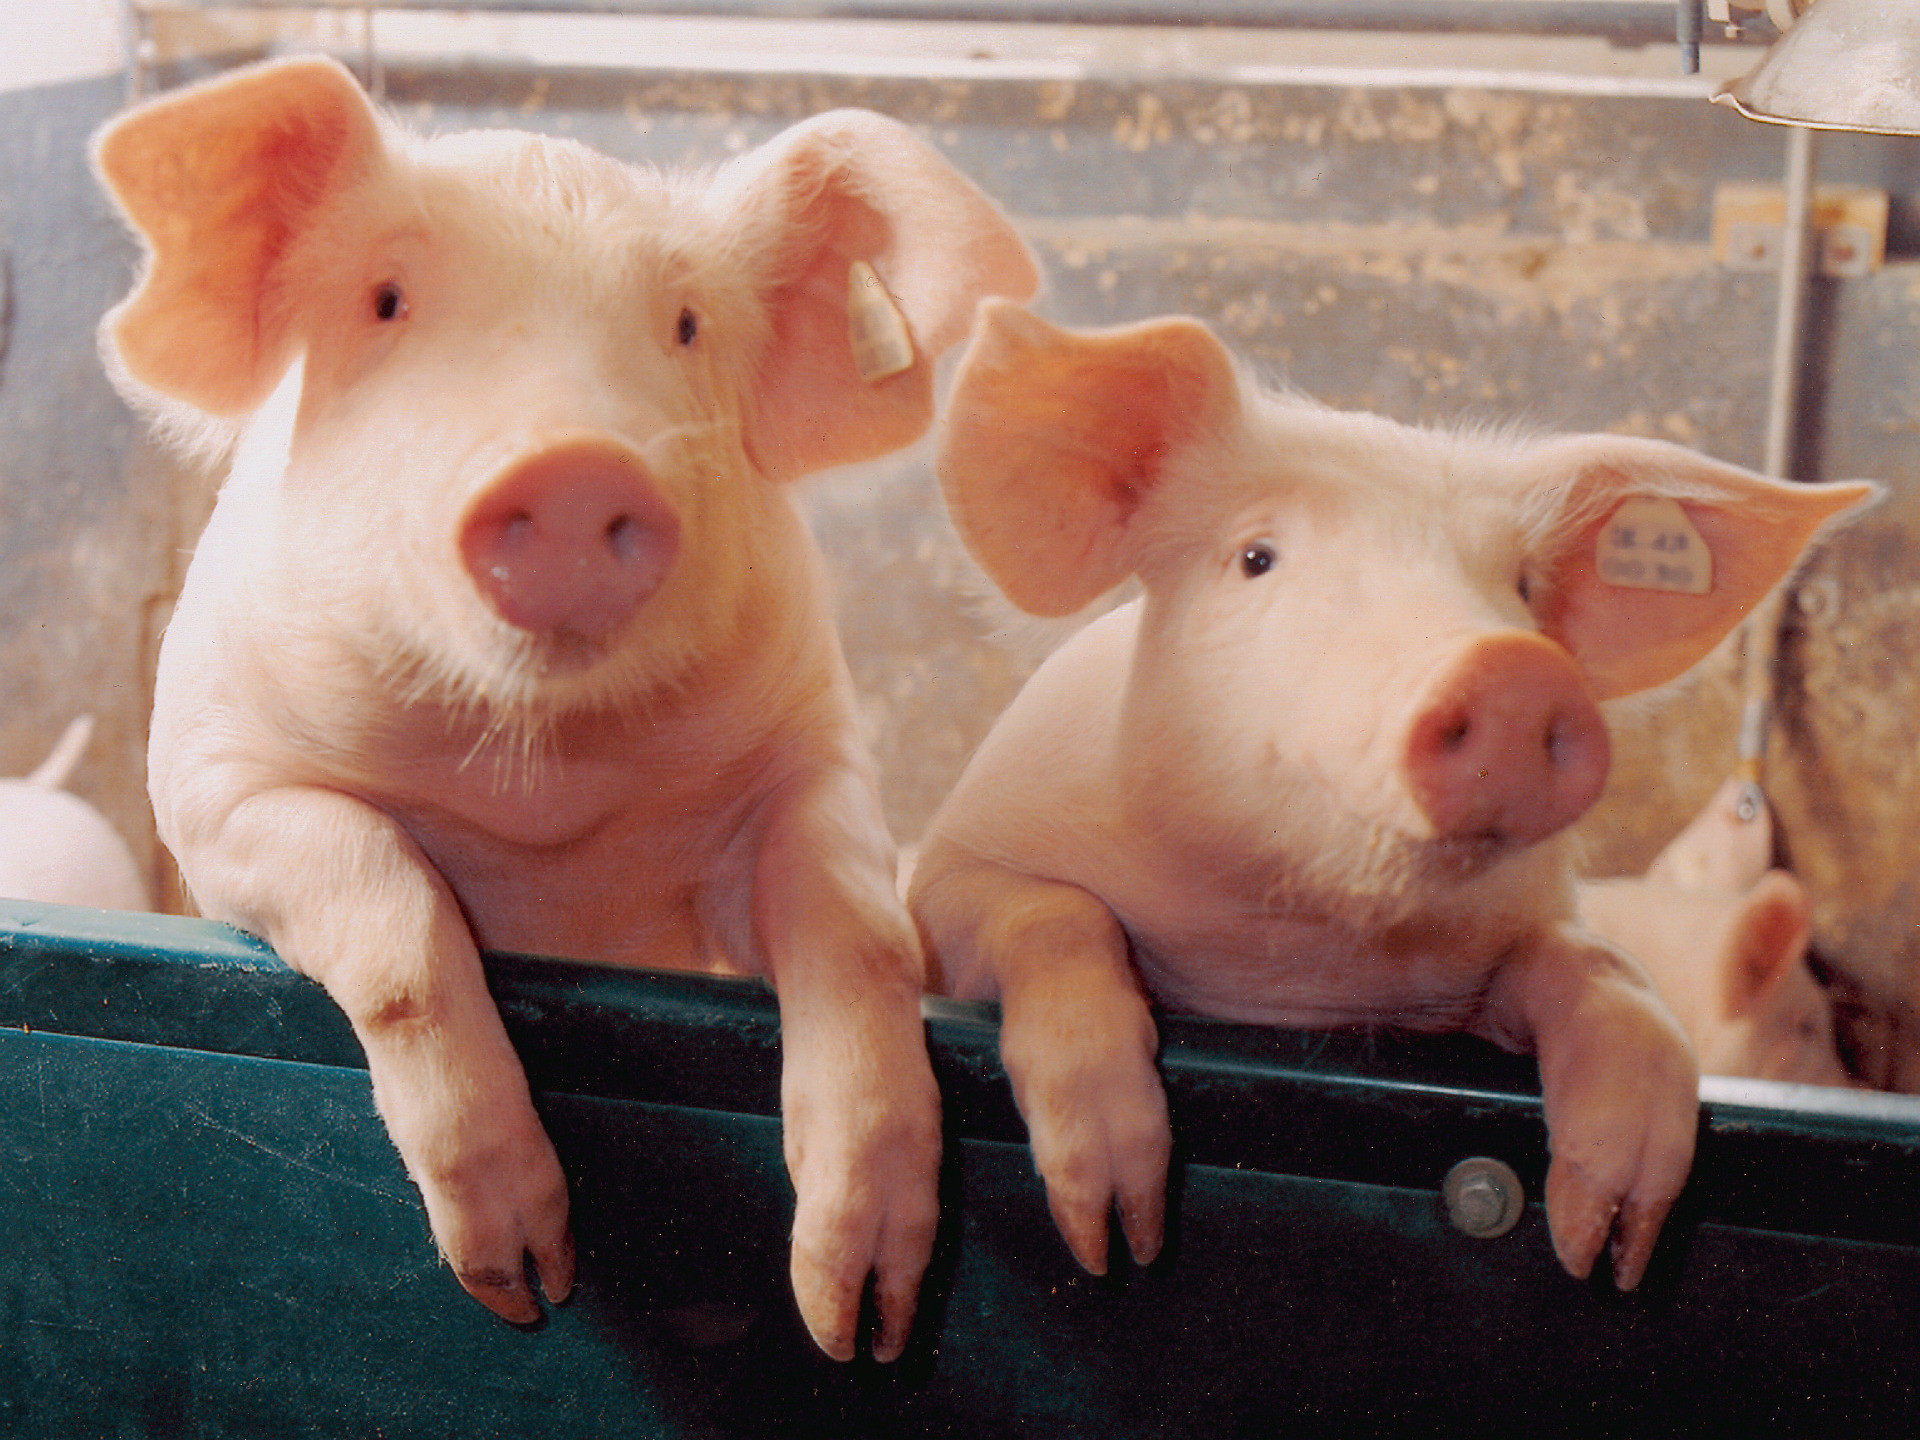 1920x1440 Pigs images Two little Piggies HD wallpaper and background photos